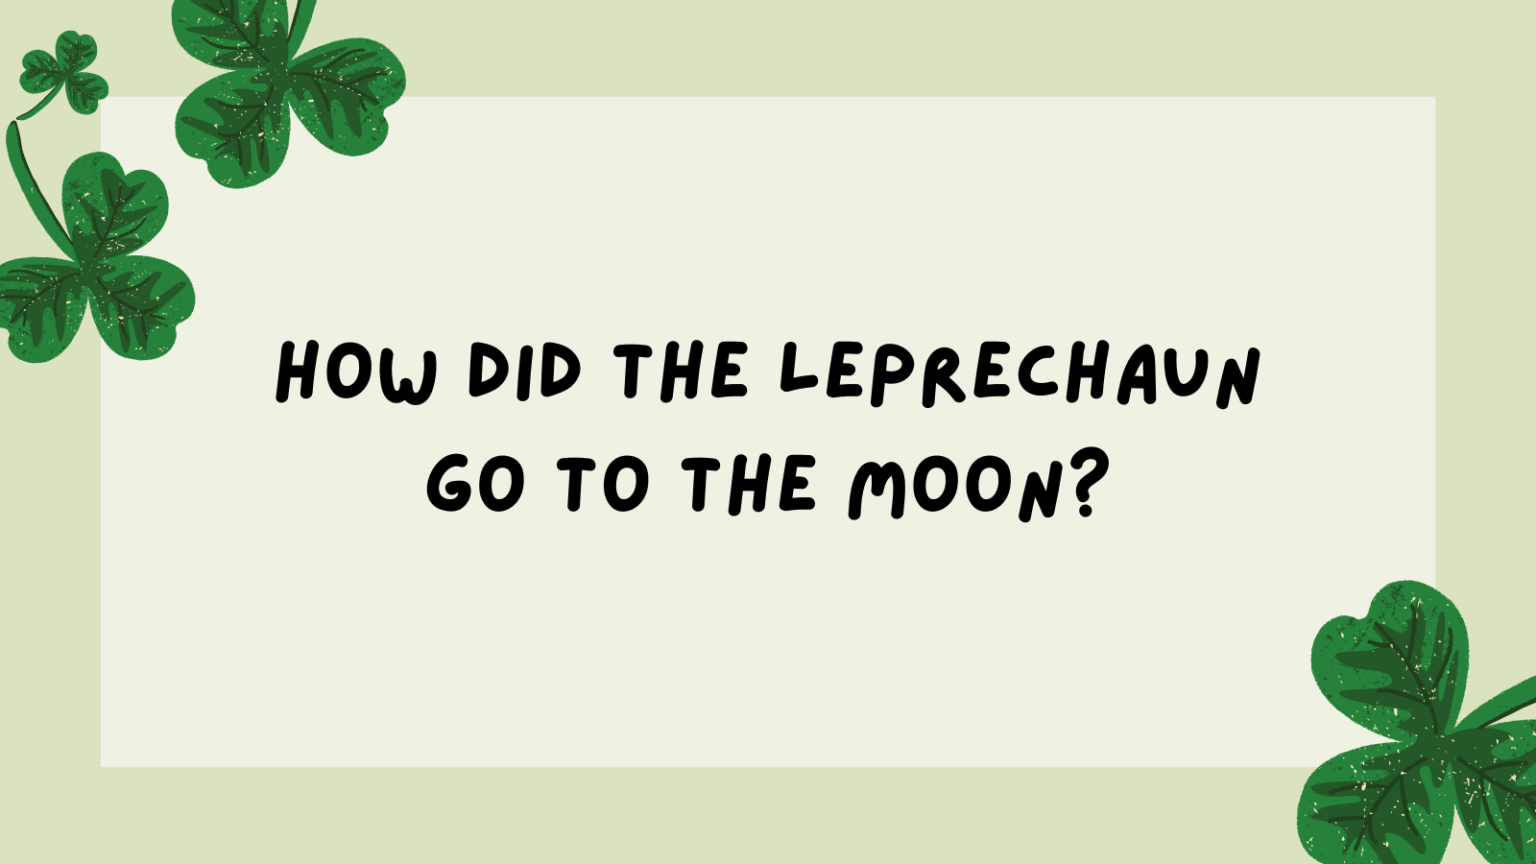 st-patrick-s-day-jokes-for-kids-17-funny-jokes-for-the-classroom